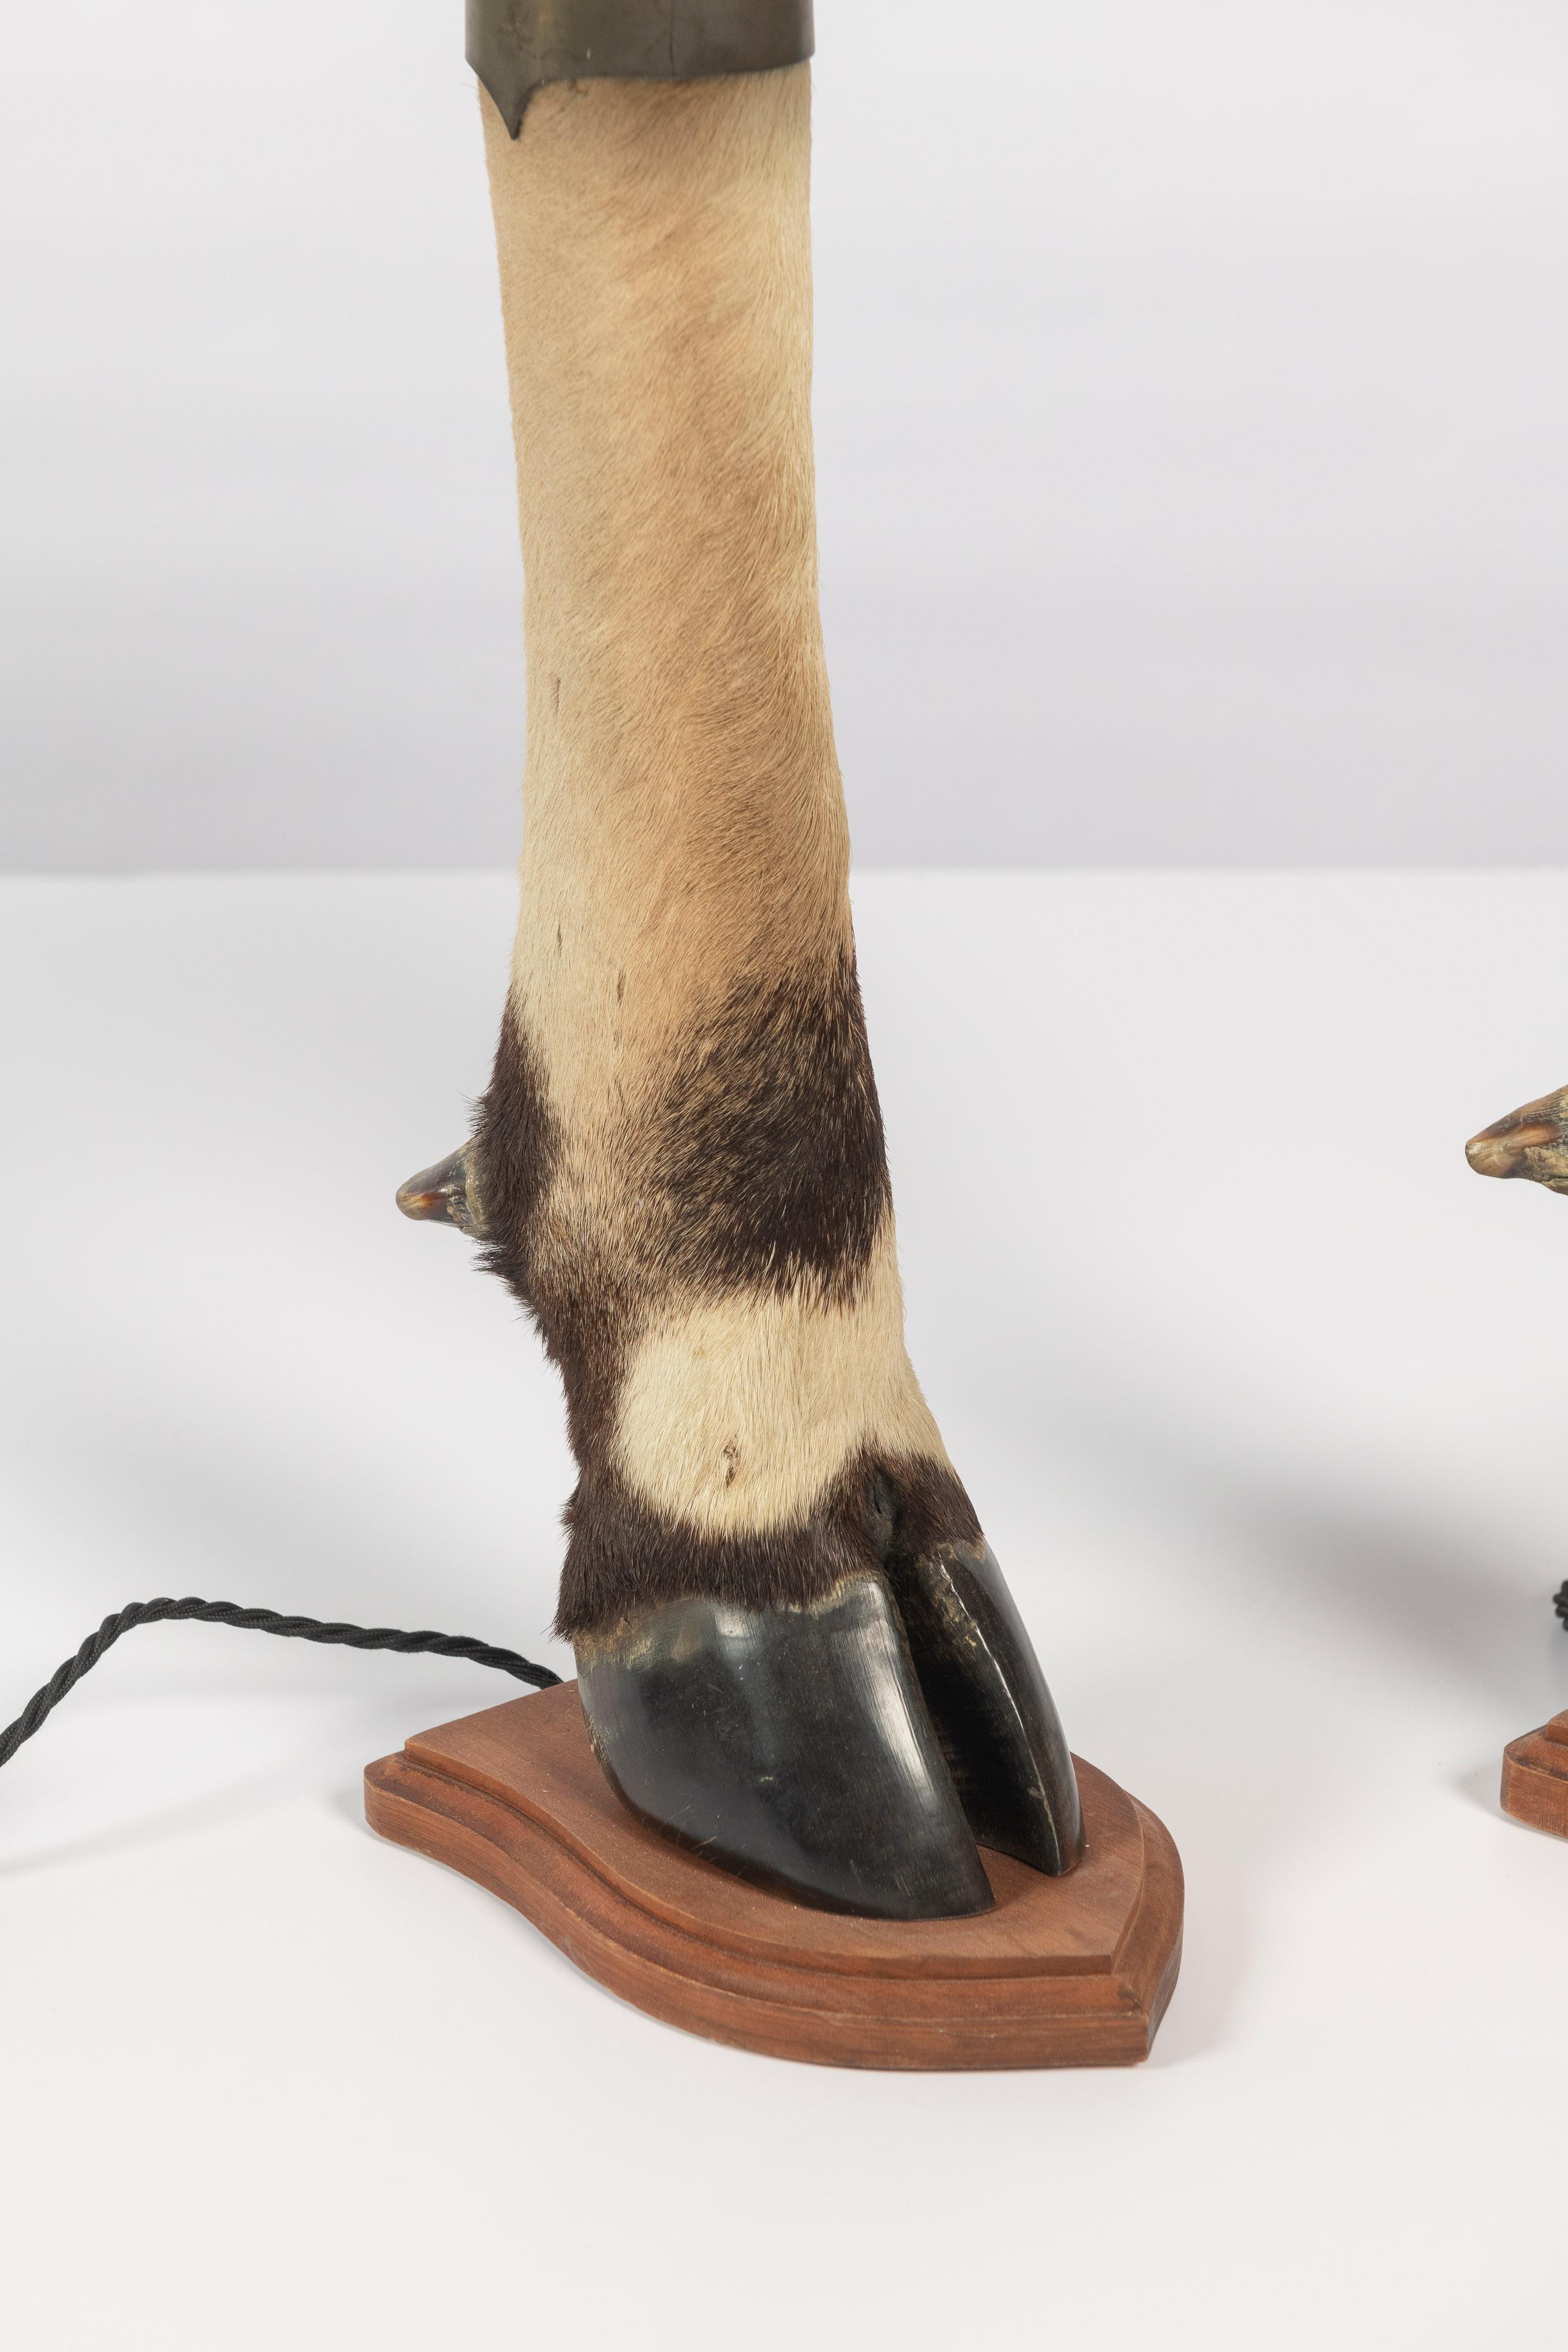 Rustic Two French Bovine Hoof Table Lamps with Shades For Sale